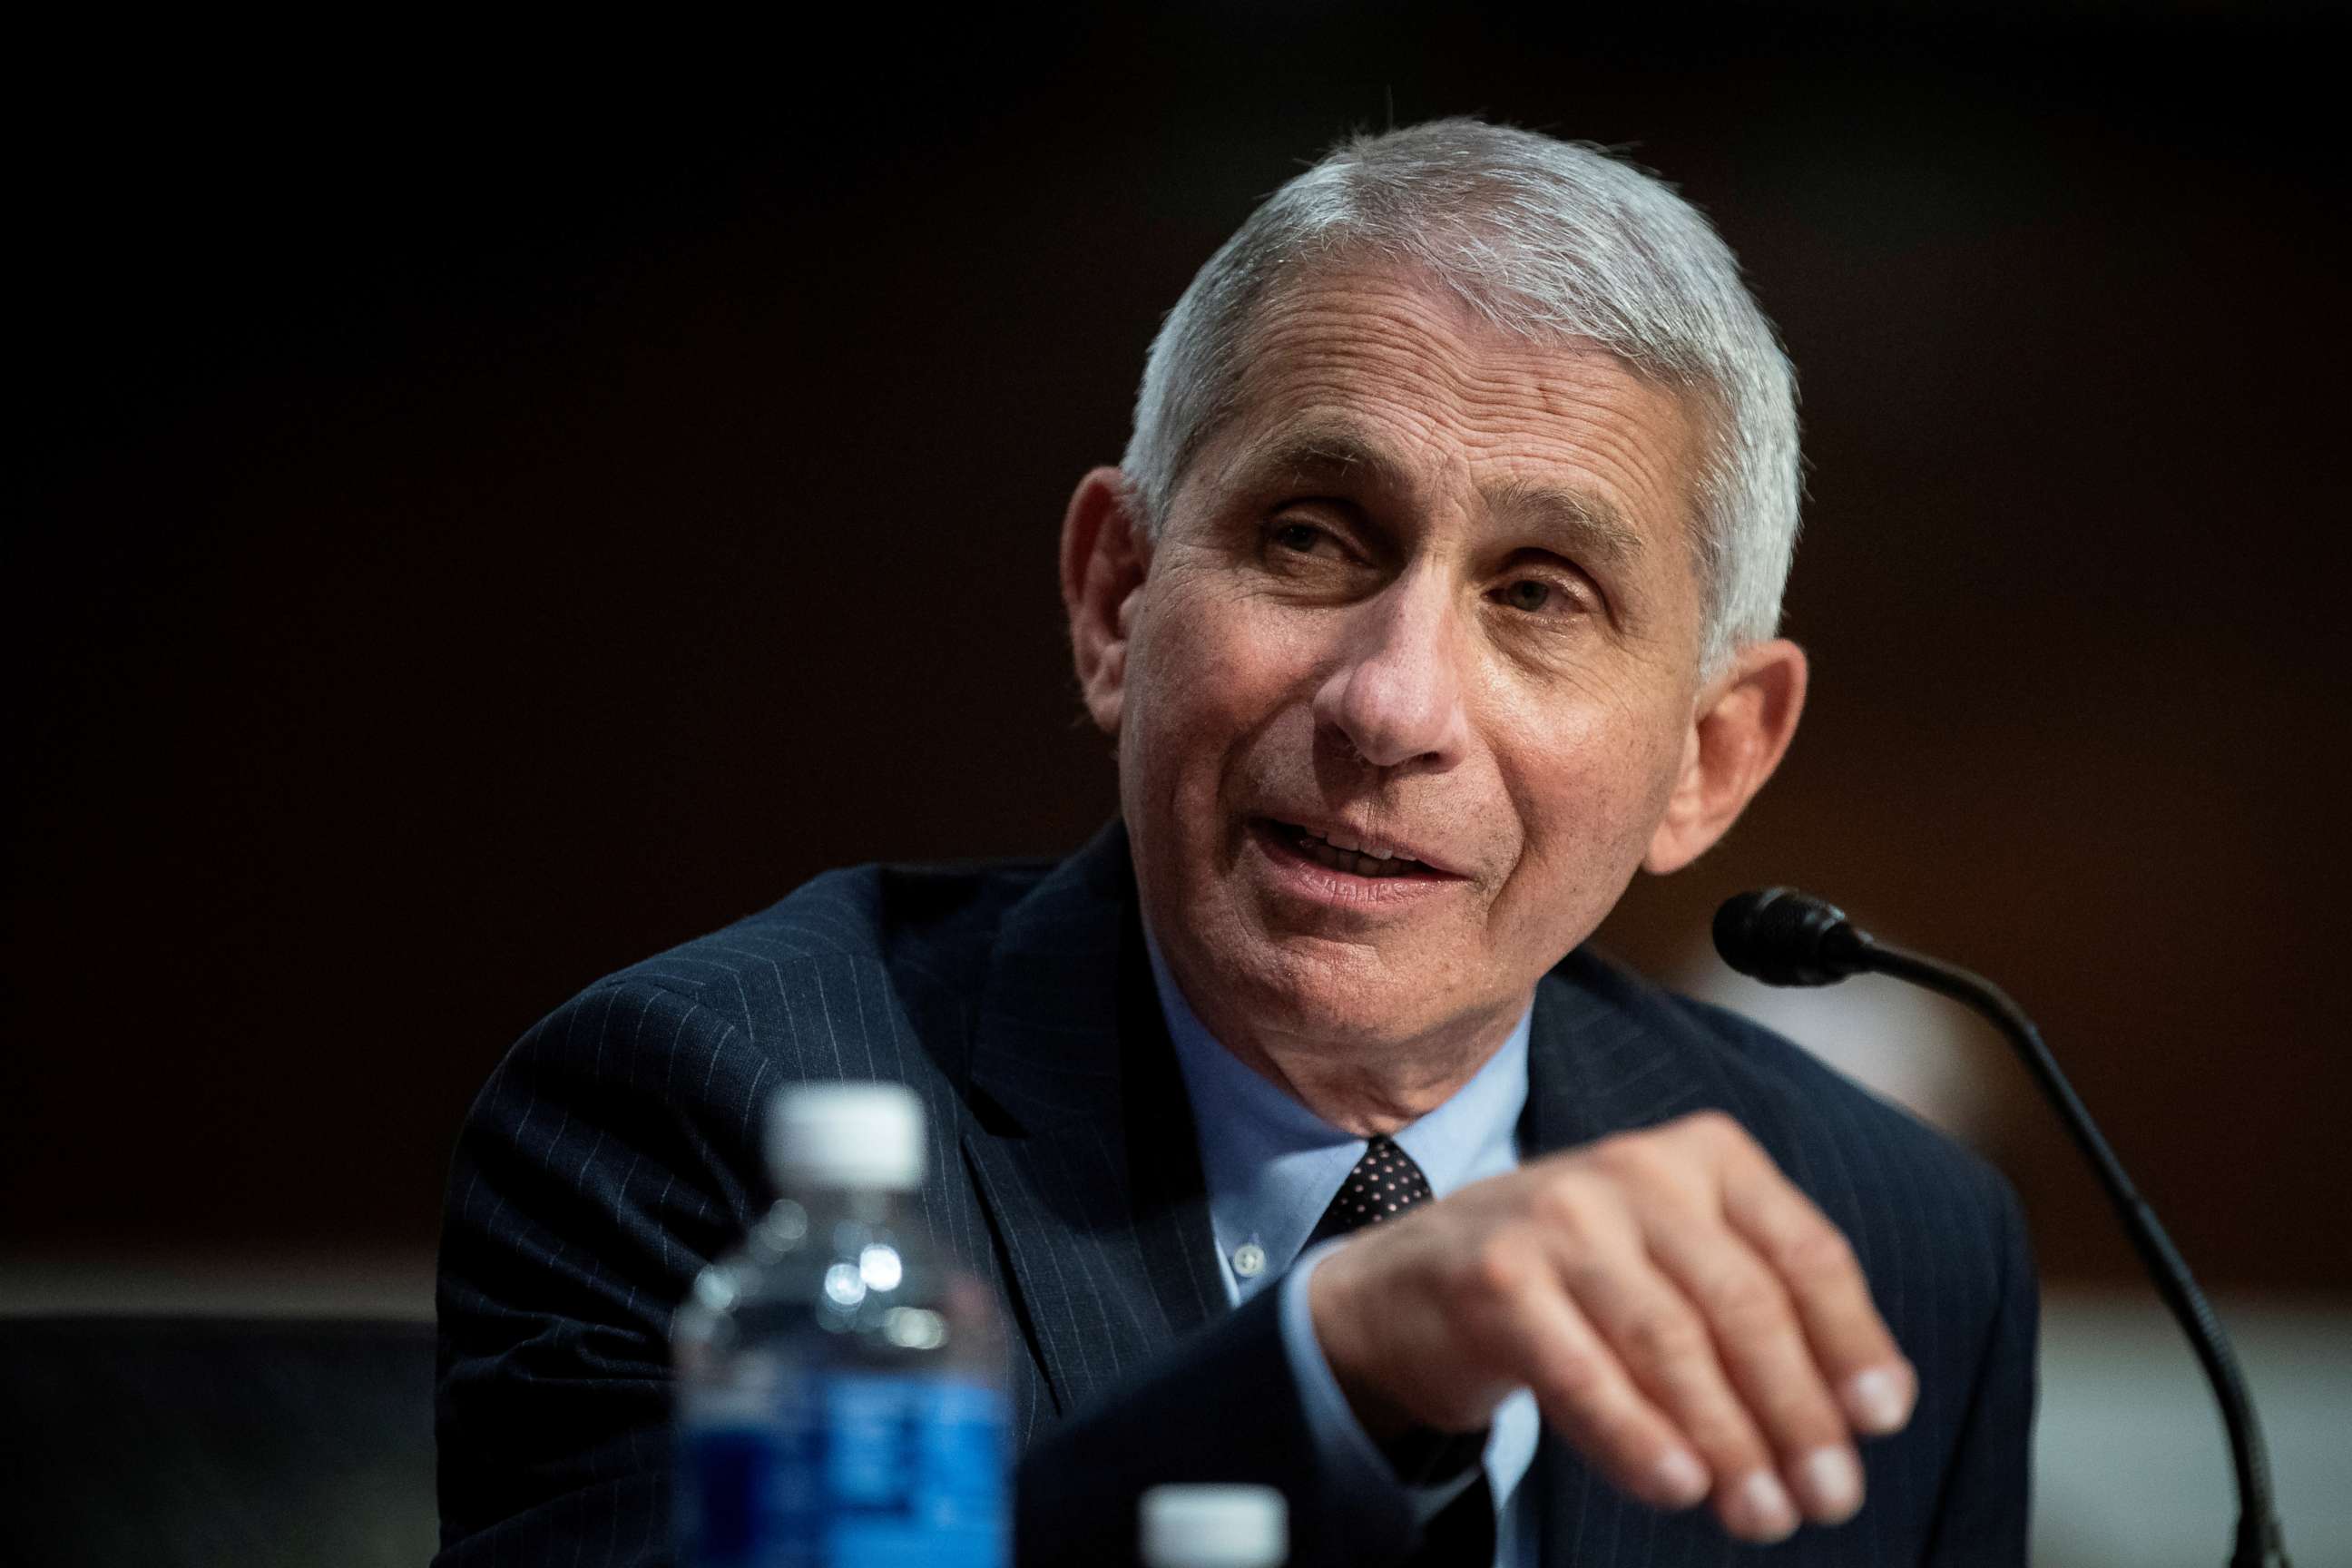 PHOTO: Anthony Fauci, director of the National Institute of Allergy and Infectious Diseases, speaks during a Senate Health, Education, Labor and Pensions Committee hearing in Washington, D.C., U.S. June 30, 2020. 